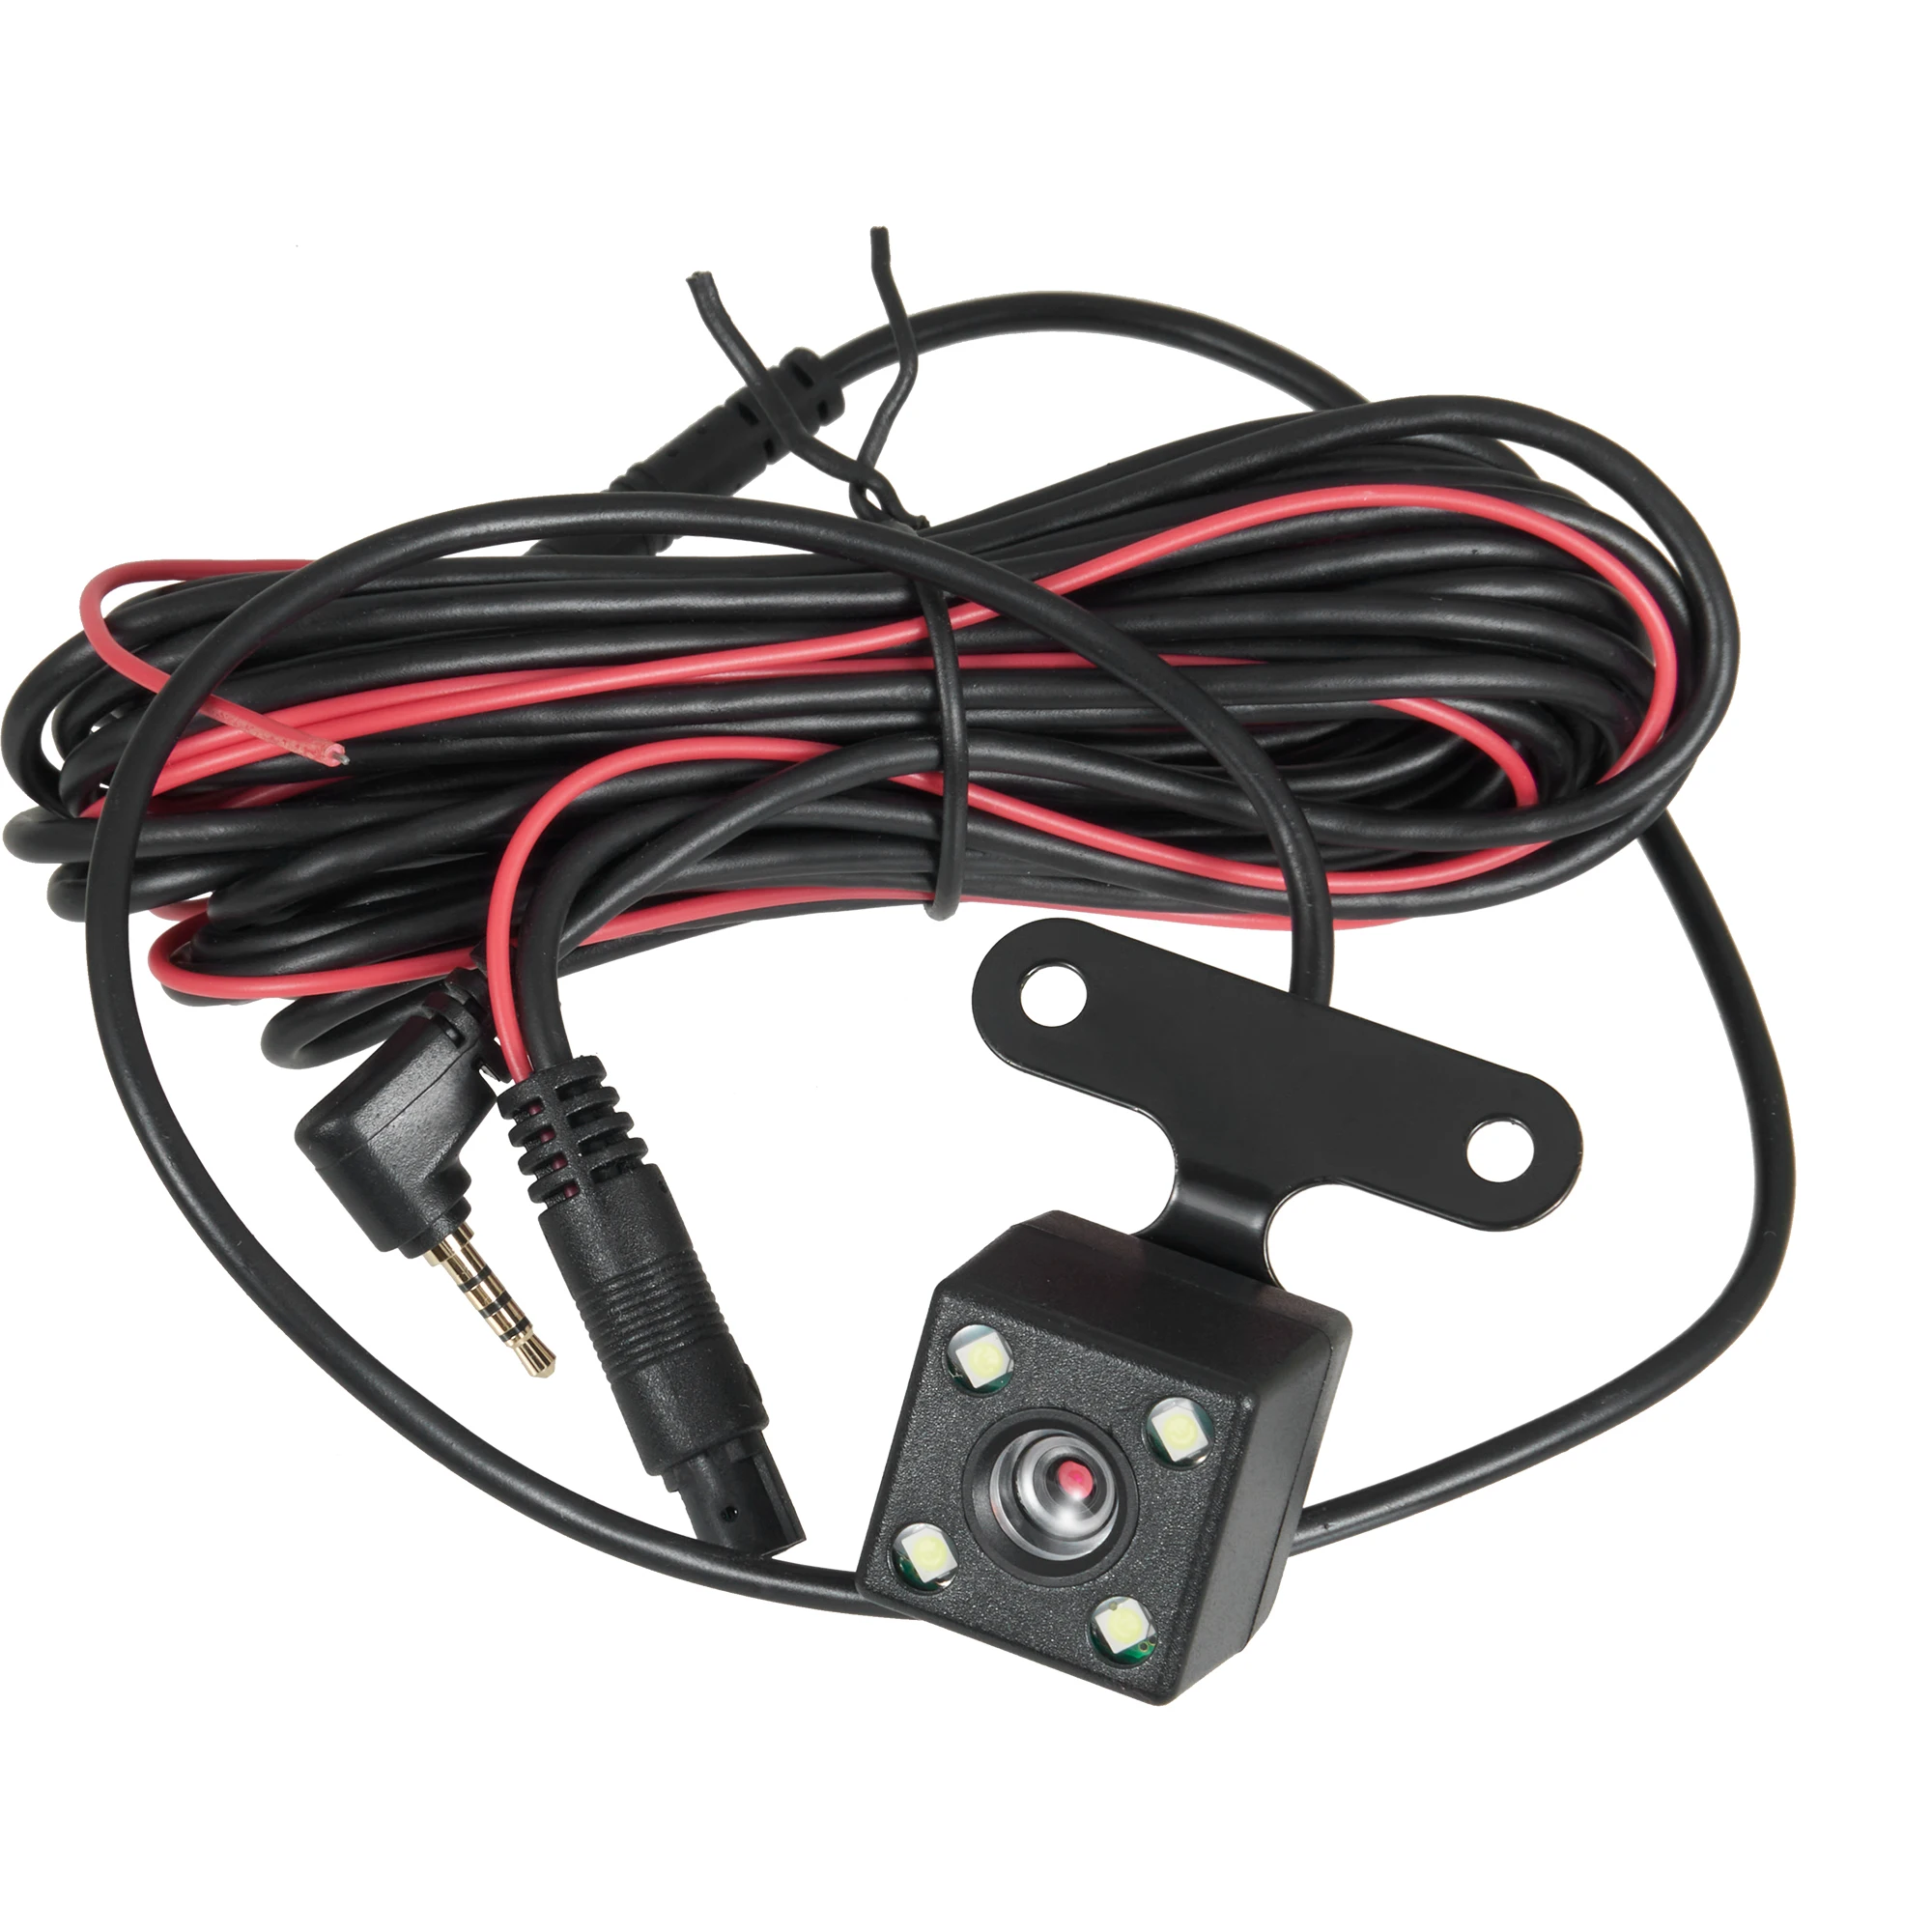 

5 Pin HD Car Rear View Camera Wide Angle 170 Degree Parking Camera Reverse 4LED Night Vision Video Camera For Car Accessories